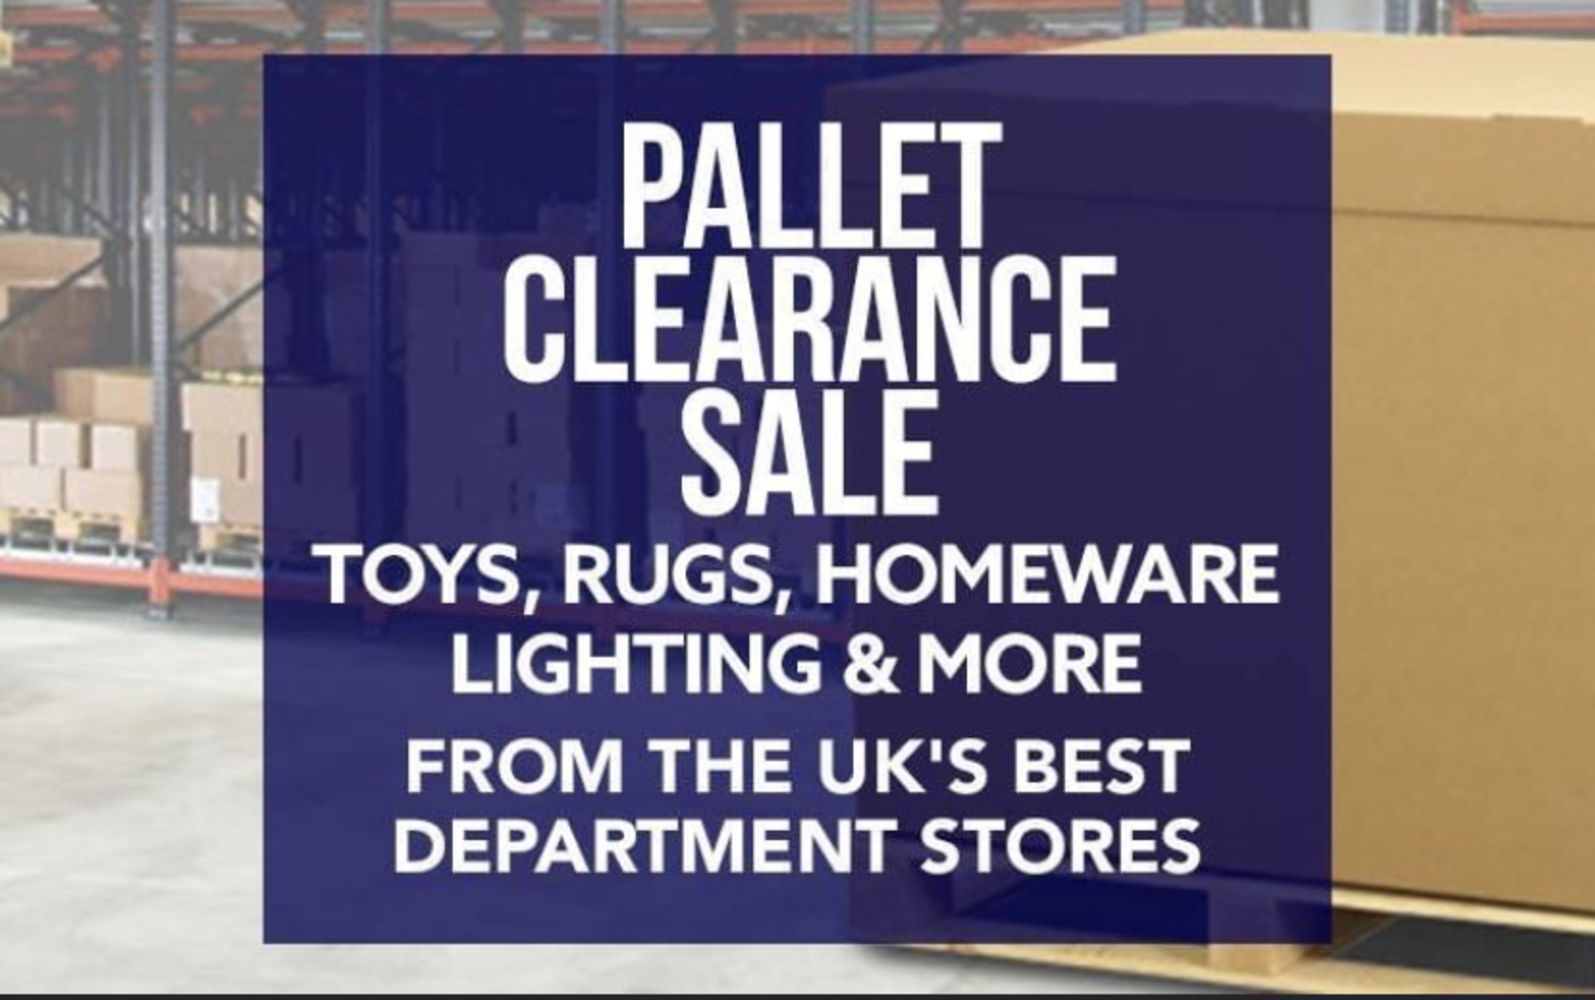 No Reserve - Pallet Clearance Sale! 27th May 2021